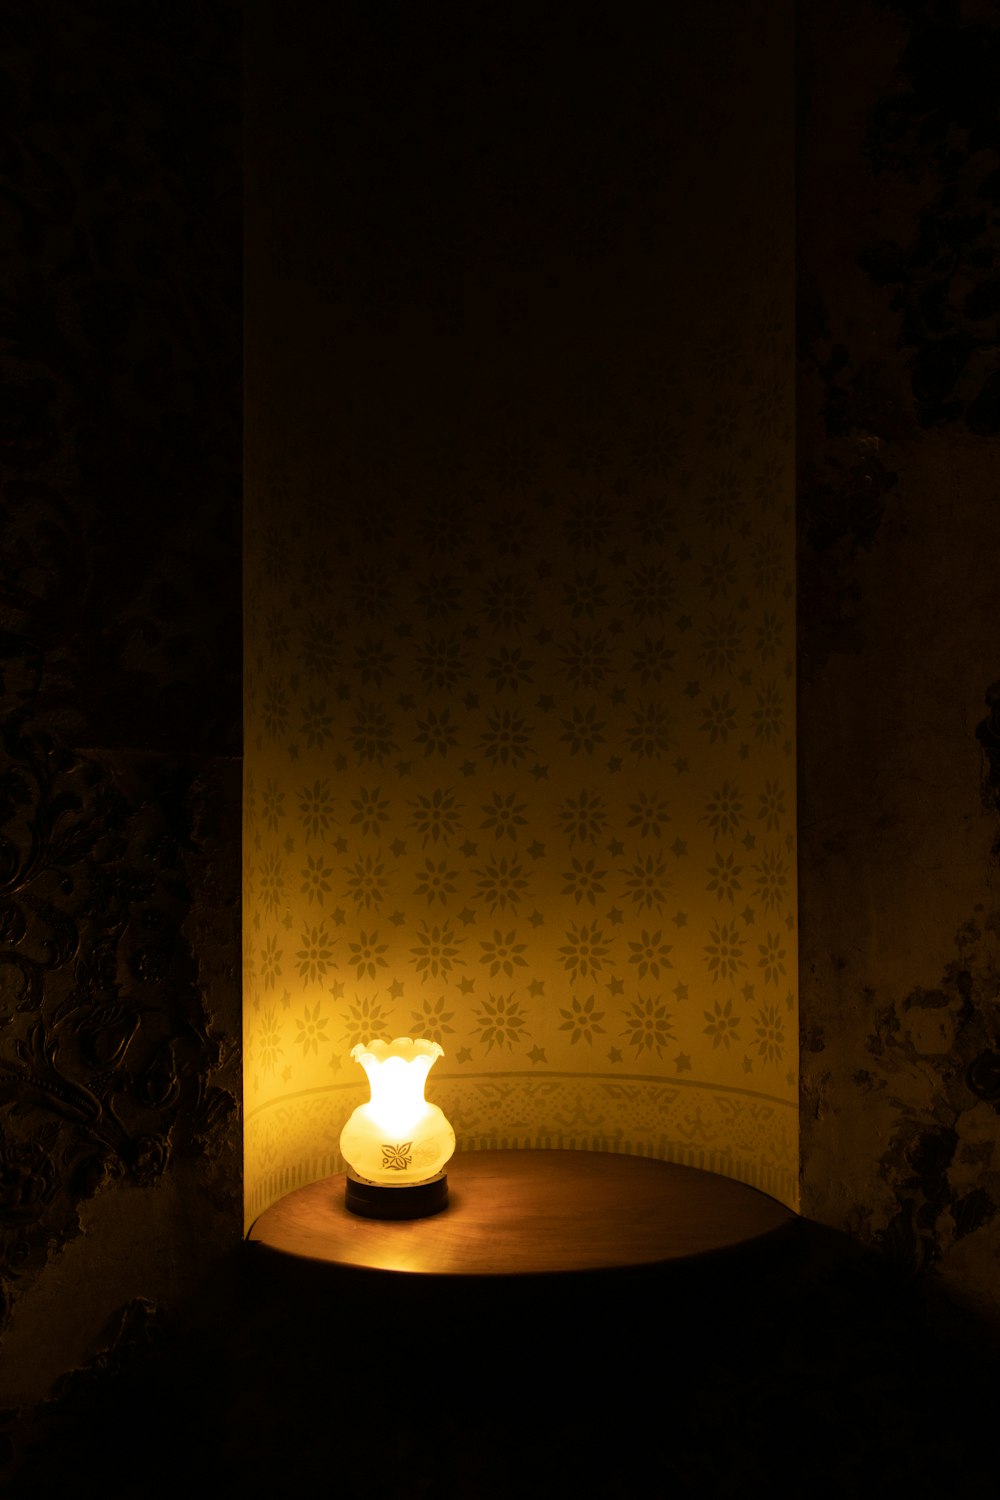 turned-on table lamp